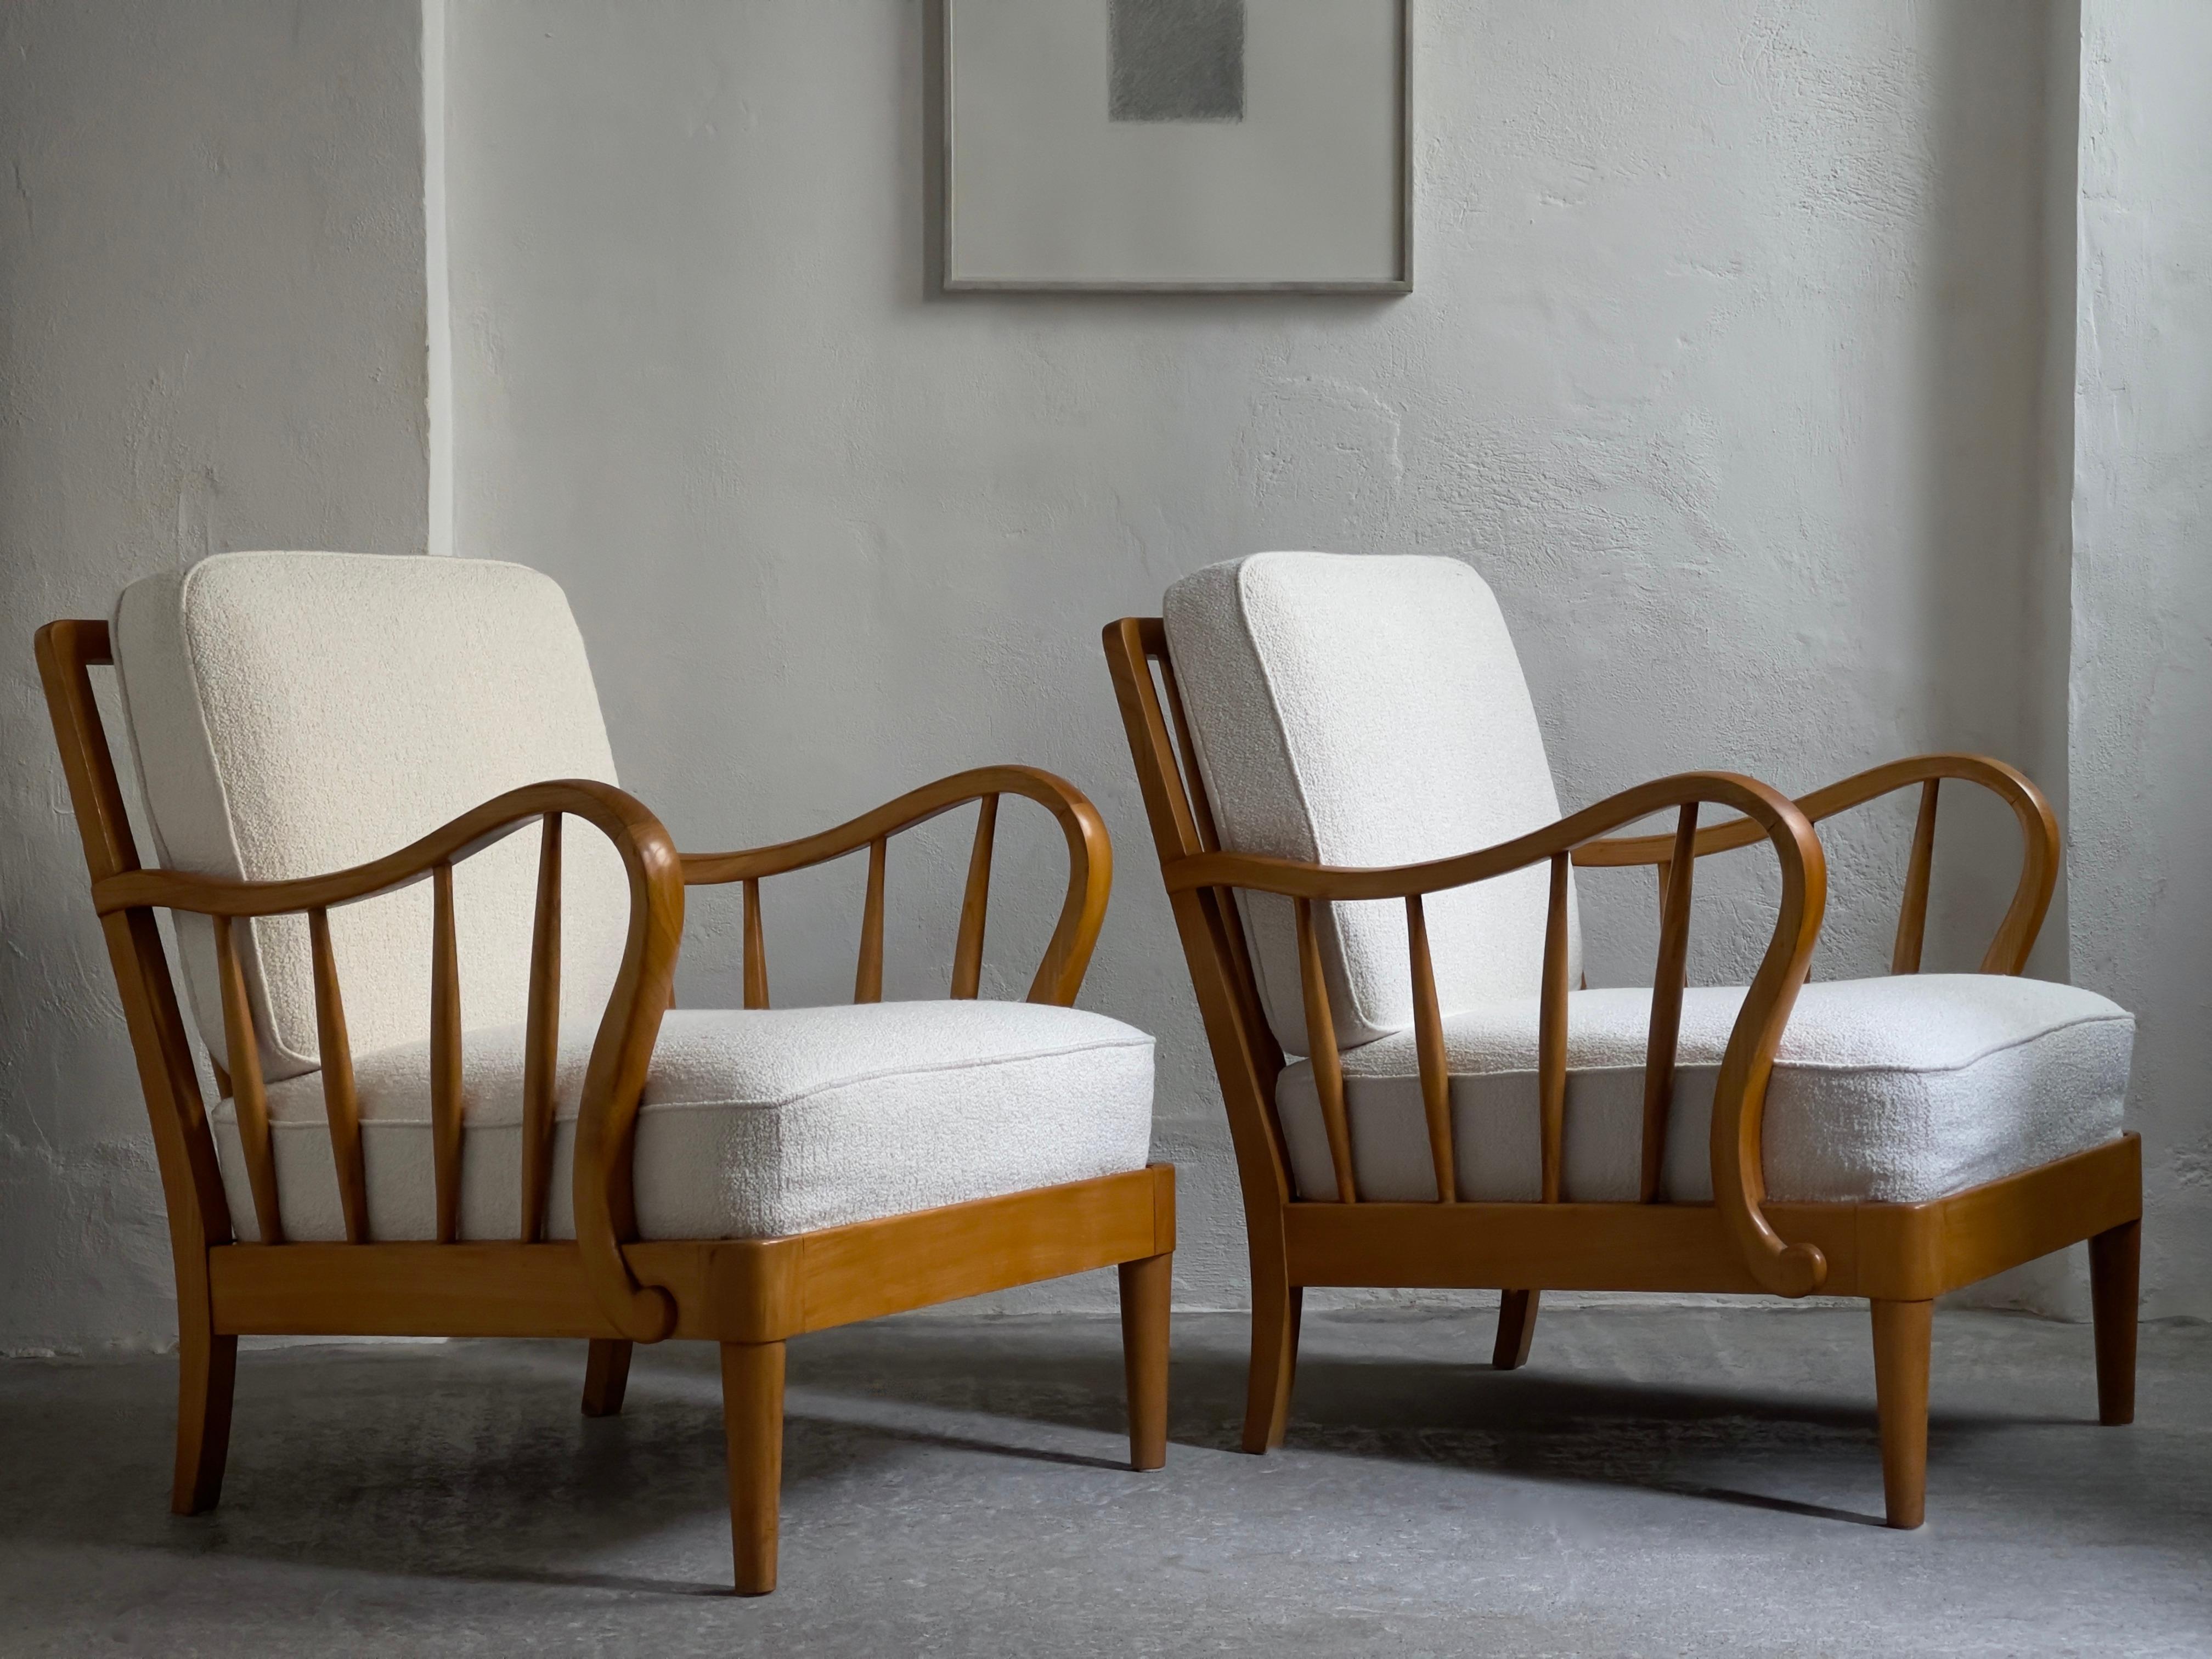 A rare and elegant pair of Danish cabinet maker lounge chairs crafted 1930s by  in rich patinated solid elm tree. The original cushions reupholstered in premium off white boucle.

Historical refinish to maintain a beautiful authentic grain and